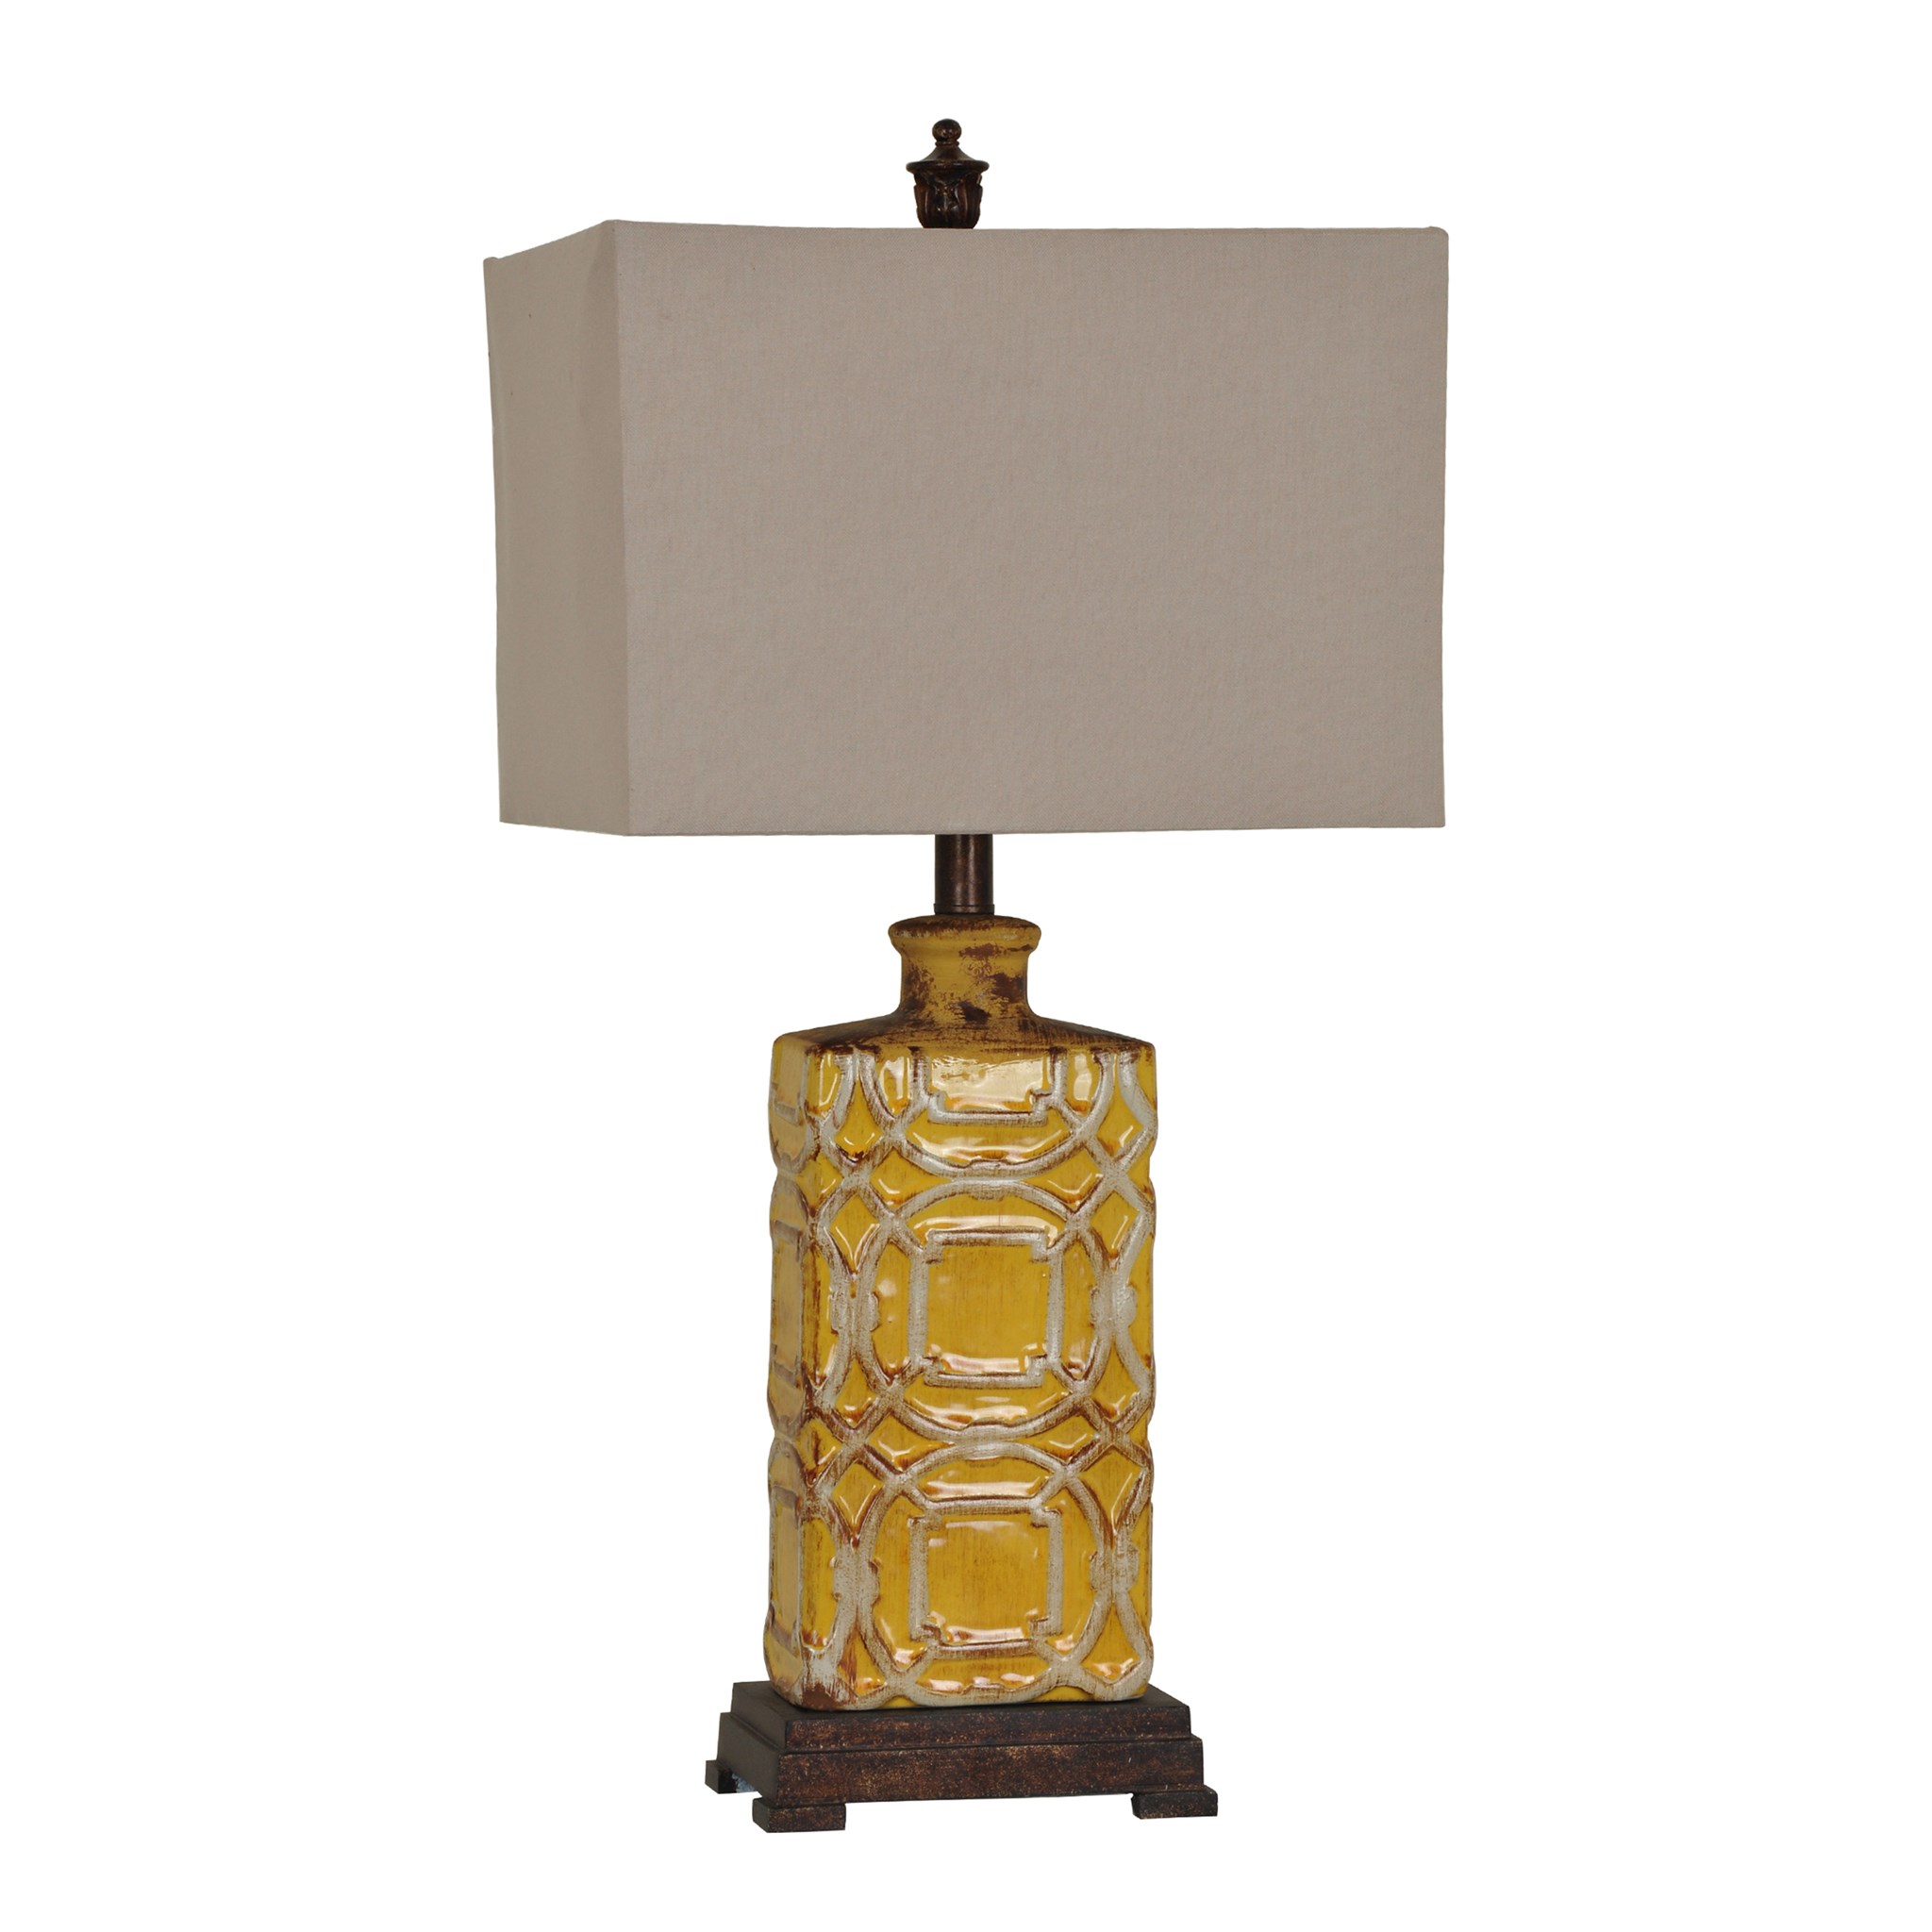 Chatham 28.5-Inch Table Lamp, Antique Yellow - image 2 of 2